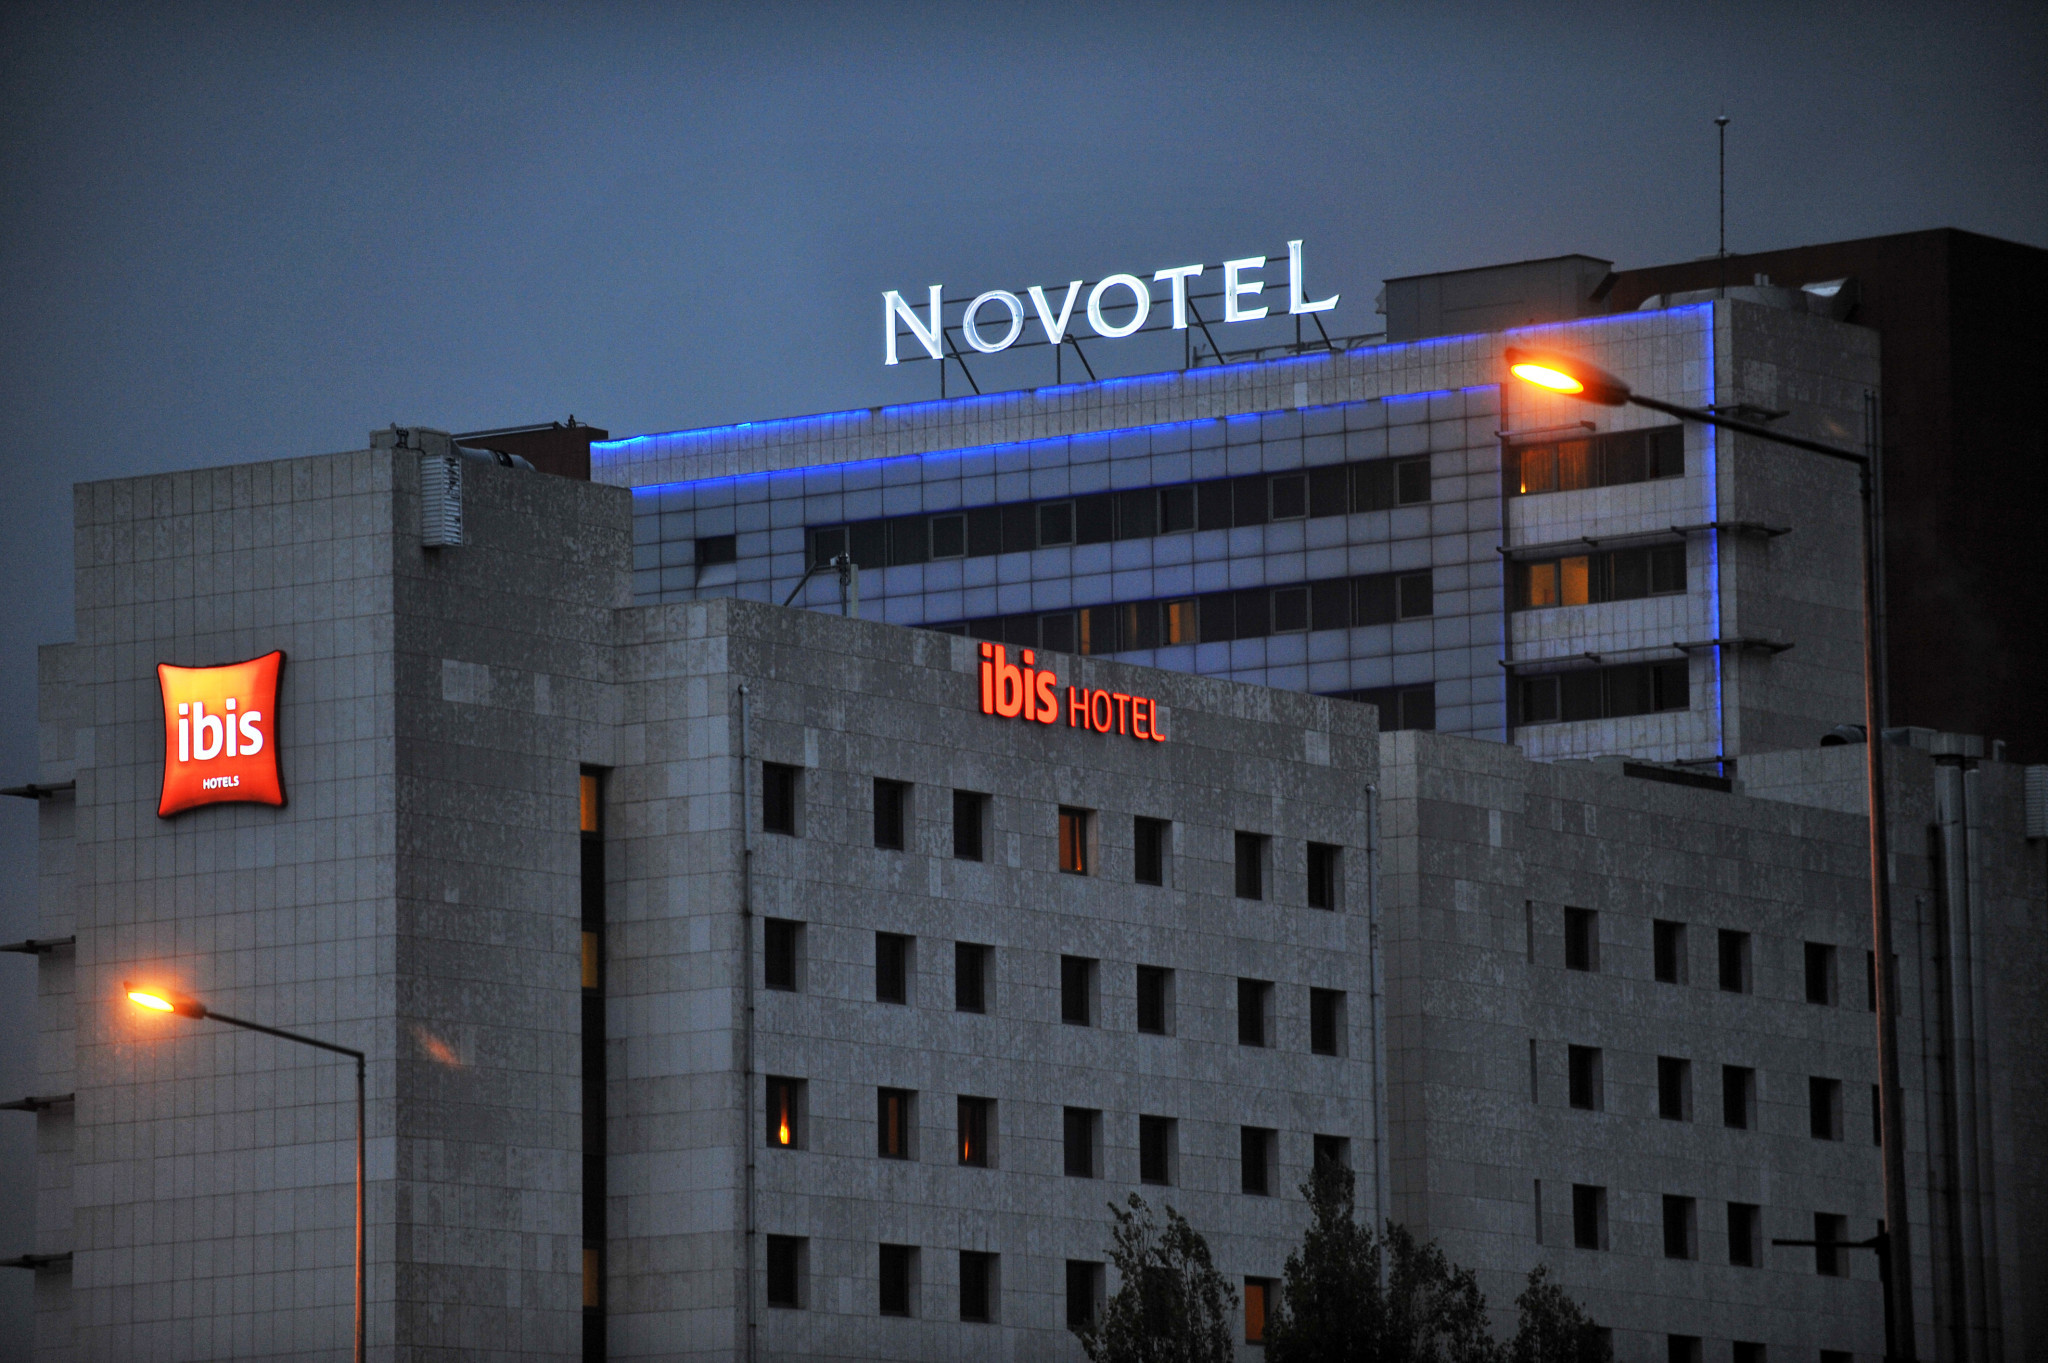 Accor Group's brands ibis budget, ibis and Novotel will provide accommodation for participants at the Men's World Floorball Championship ©Getty Images